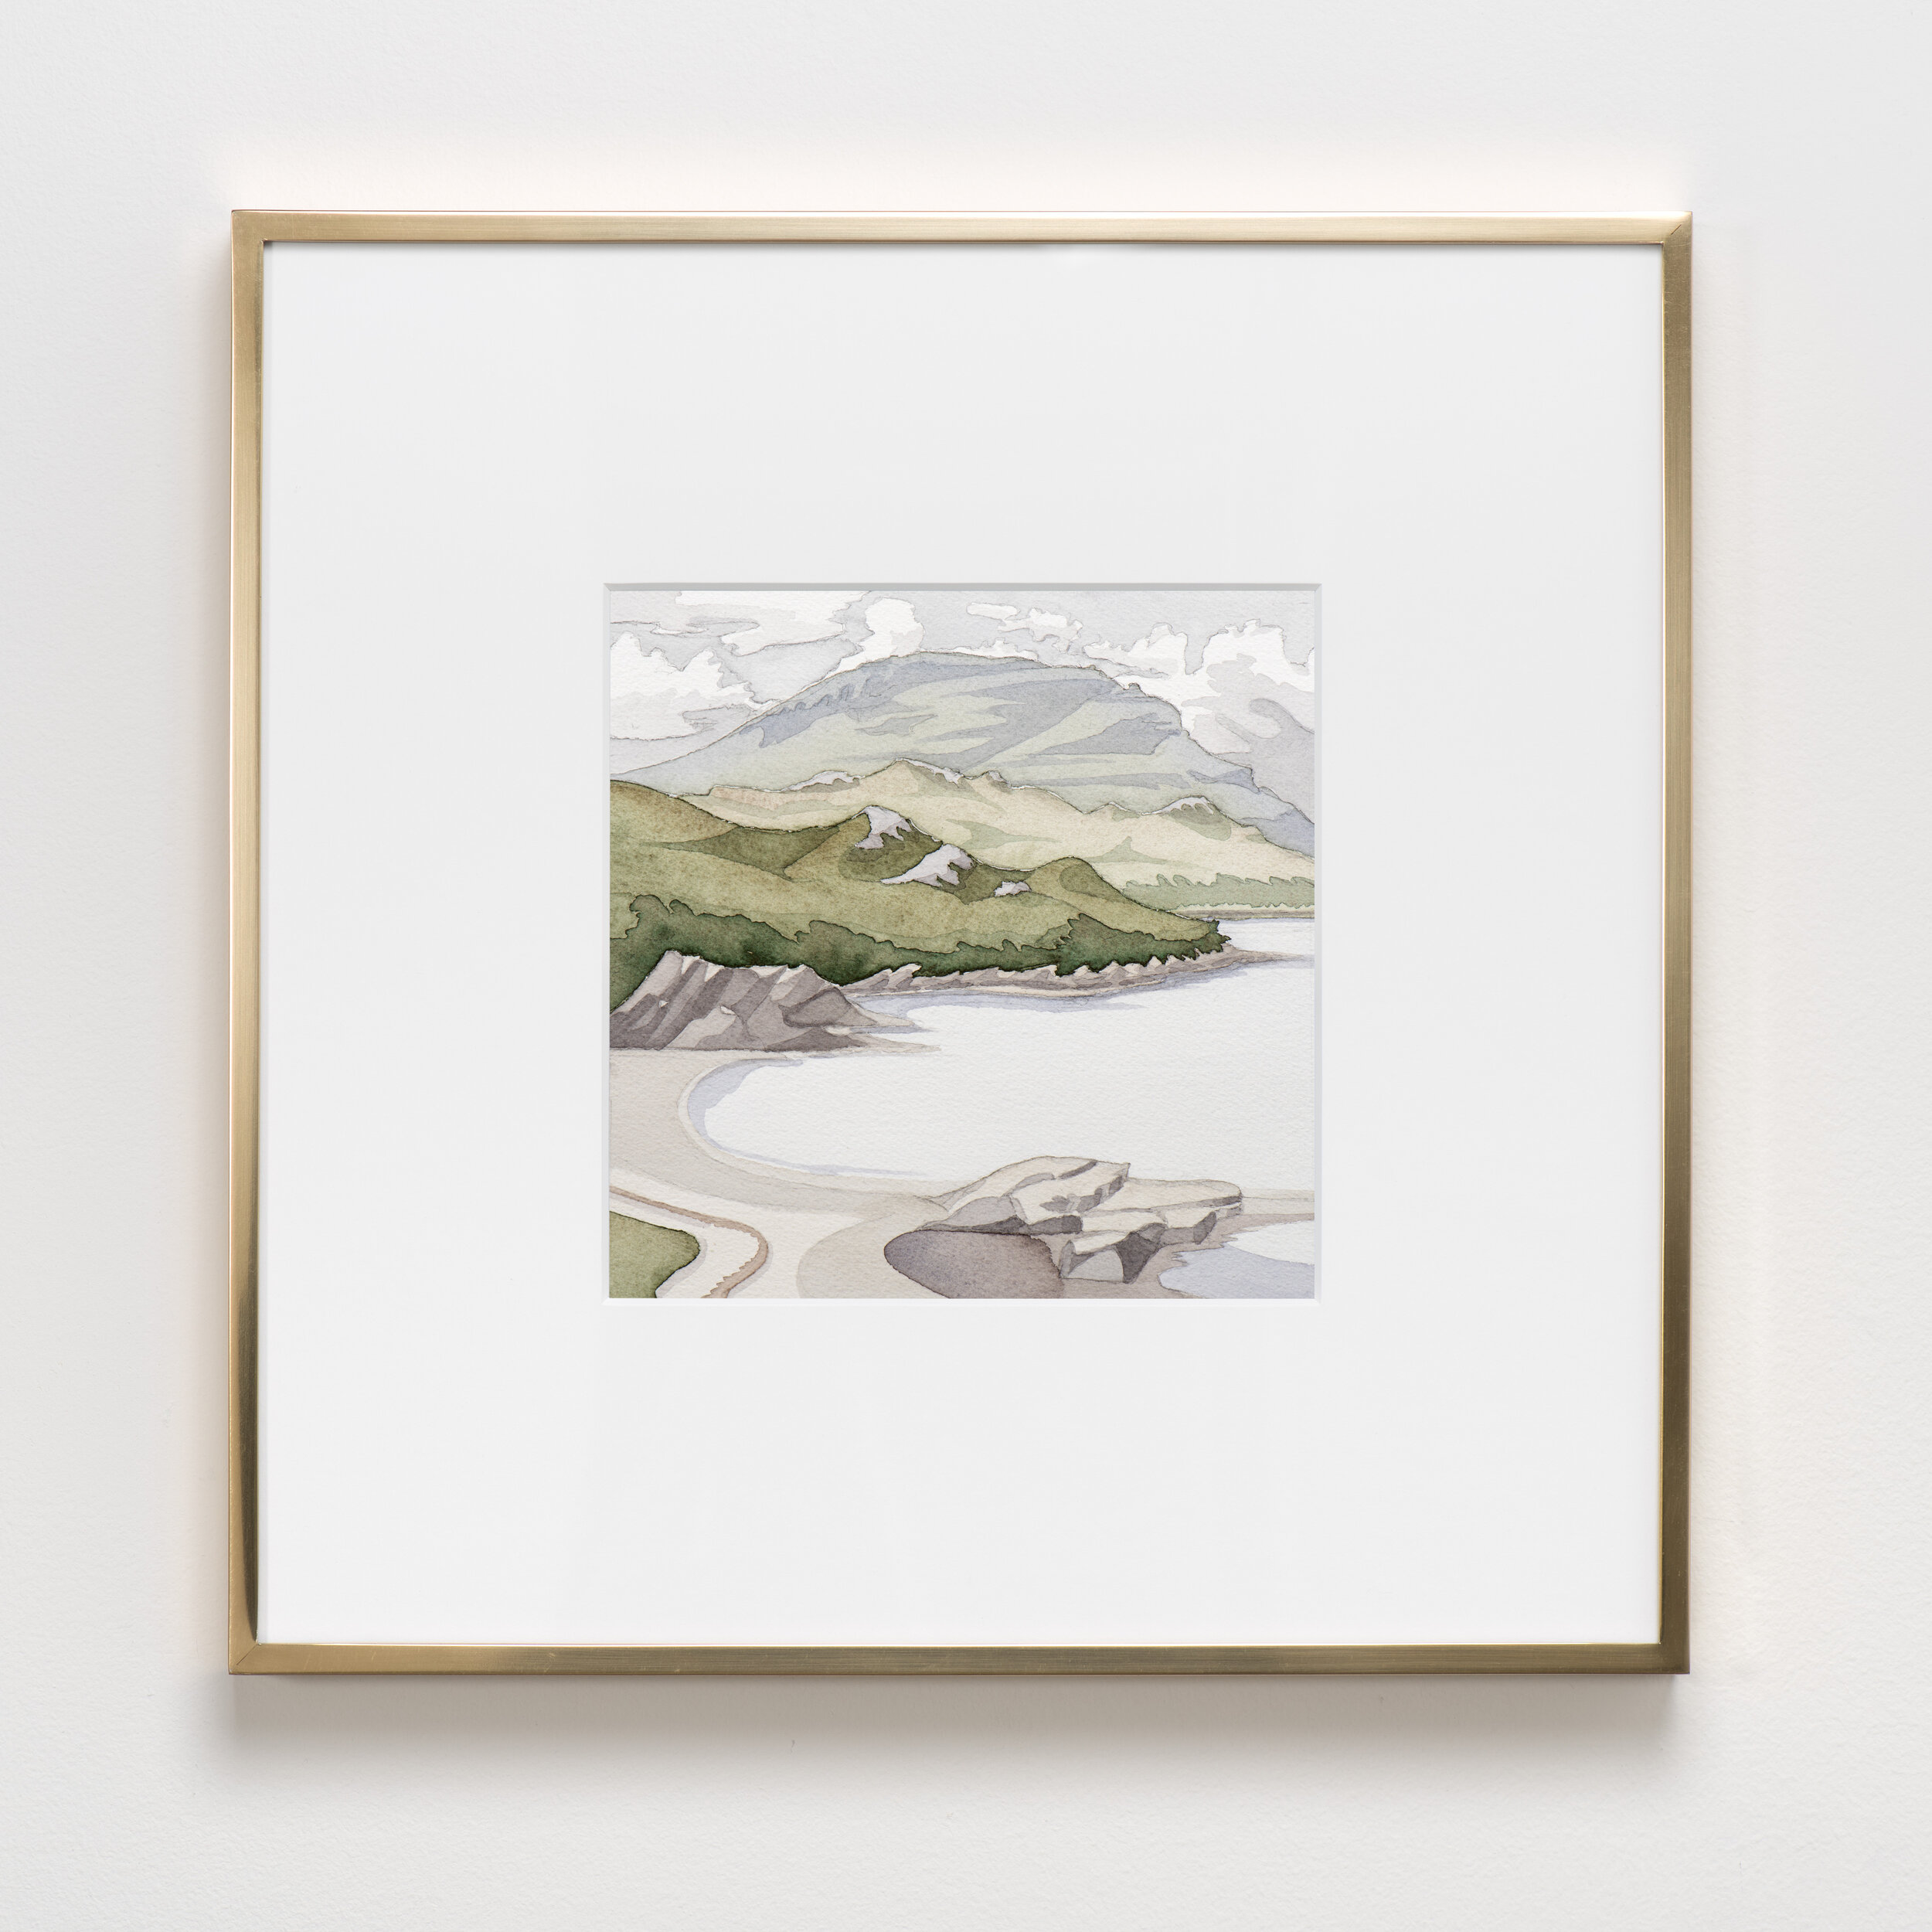   Shieldaig , 2019 Watercolor on paper 16 1/4 x 16 1/4 inches (framed) 41.3 x 41.3 cm (framed) KYWH-0024 